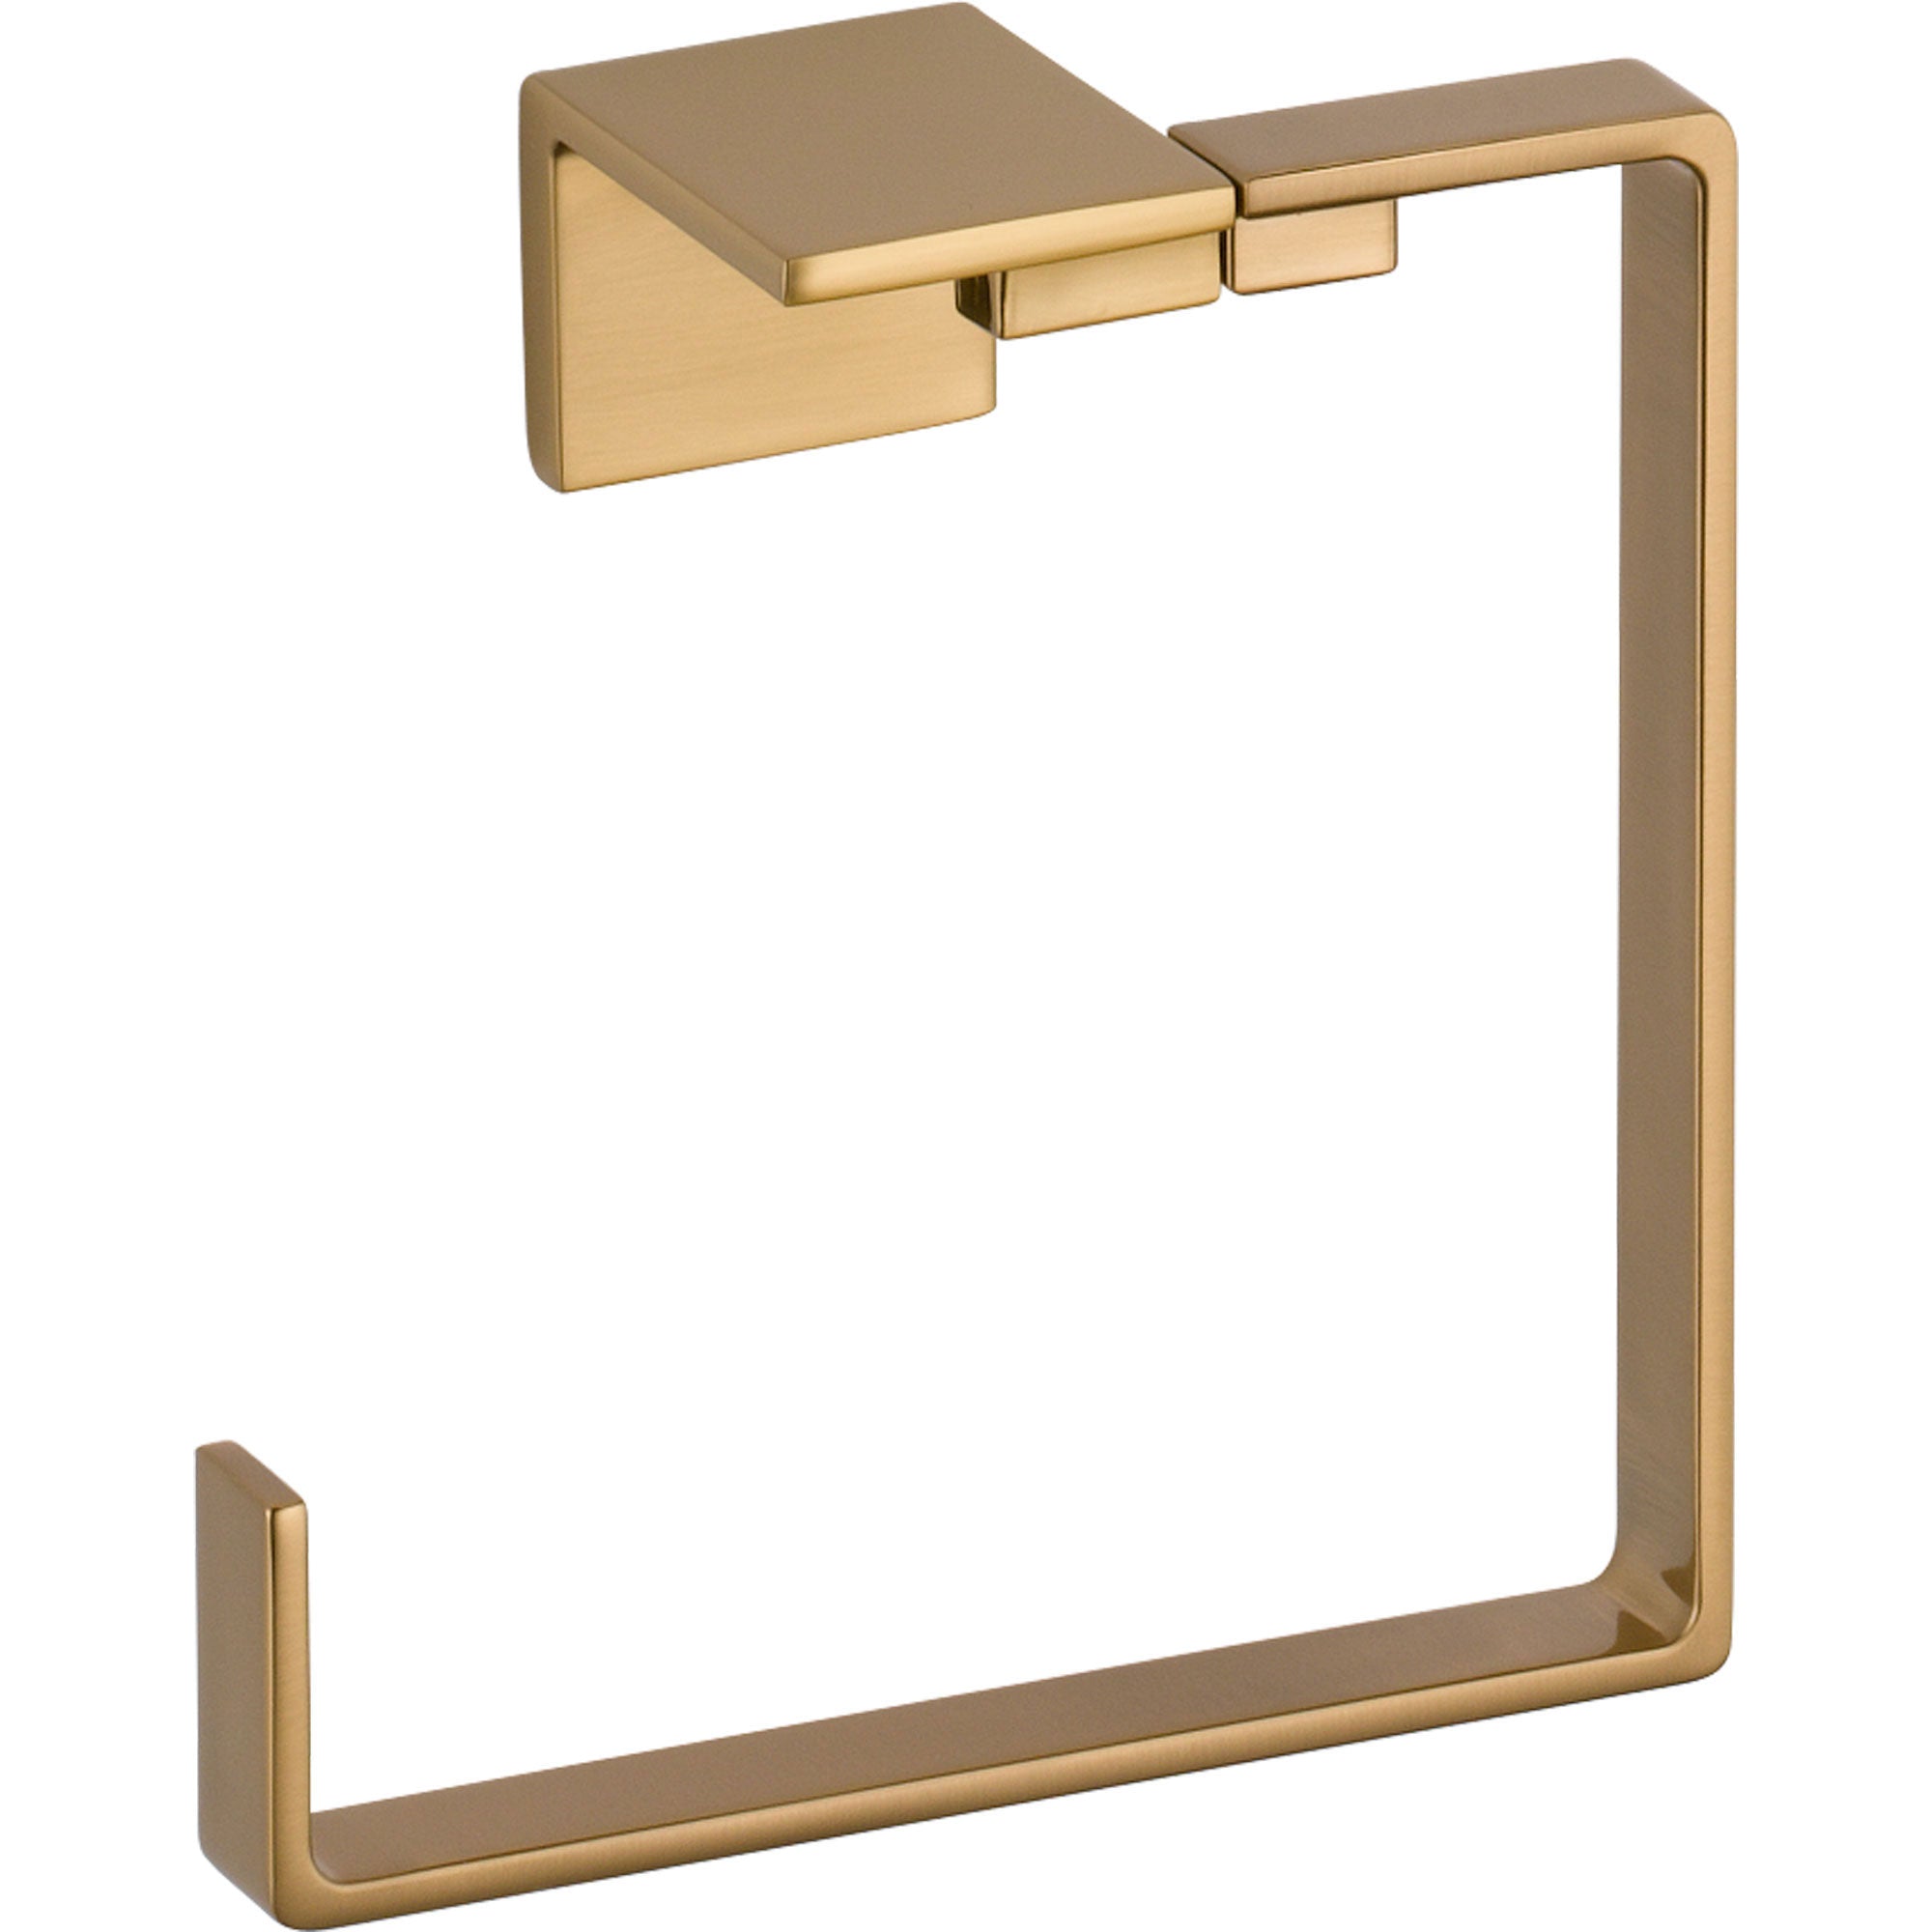 Delta Vero Champagne Bronze STANDARD Bathroom Accessory Set Includes: 24  Towel Bar, Toilet Paper Holder, Double Robe Hook, and Towel Ring D10061AP